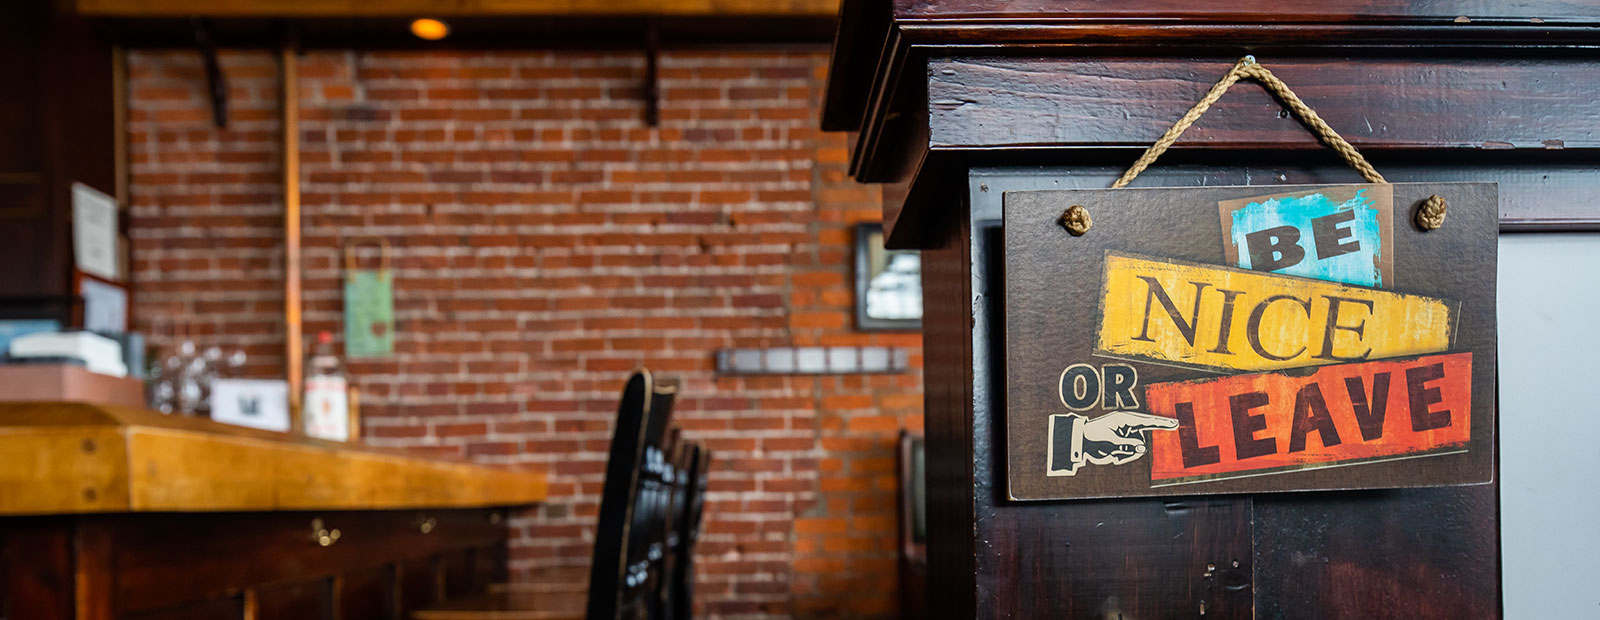 There's one simple rule to follow at Vintage Tavern: Be nice, or leave.